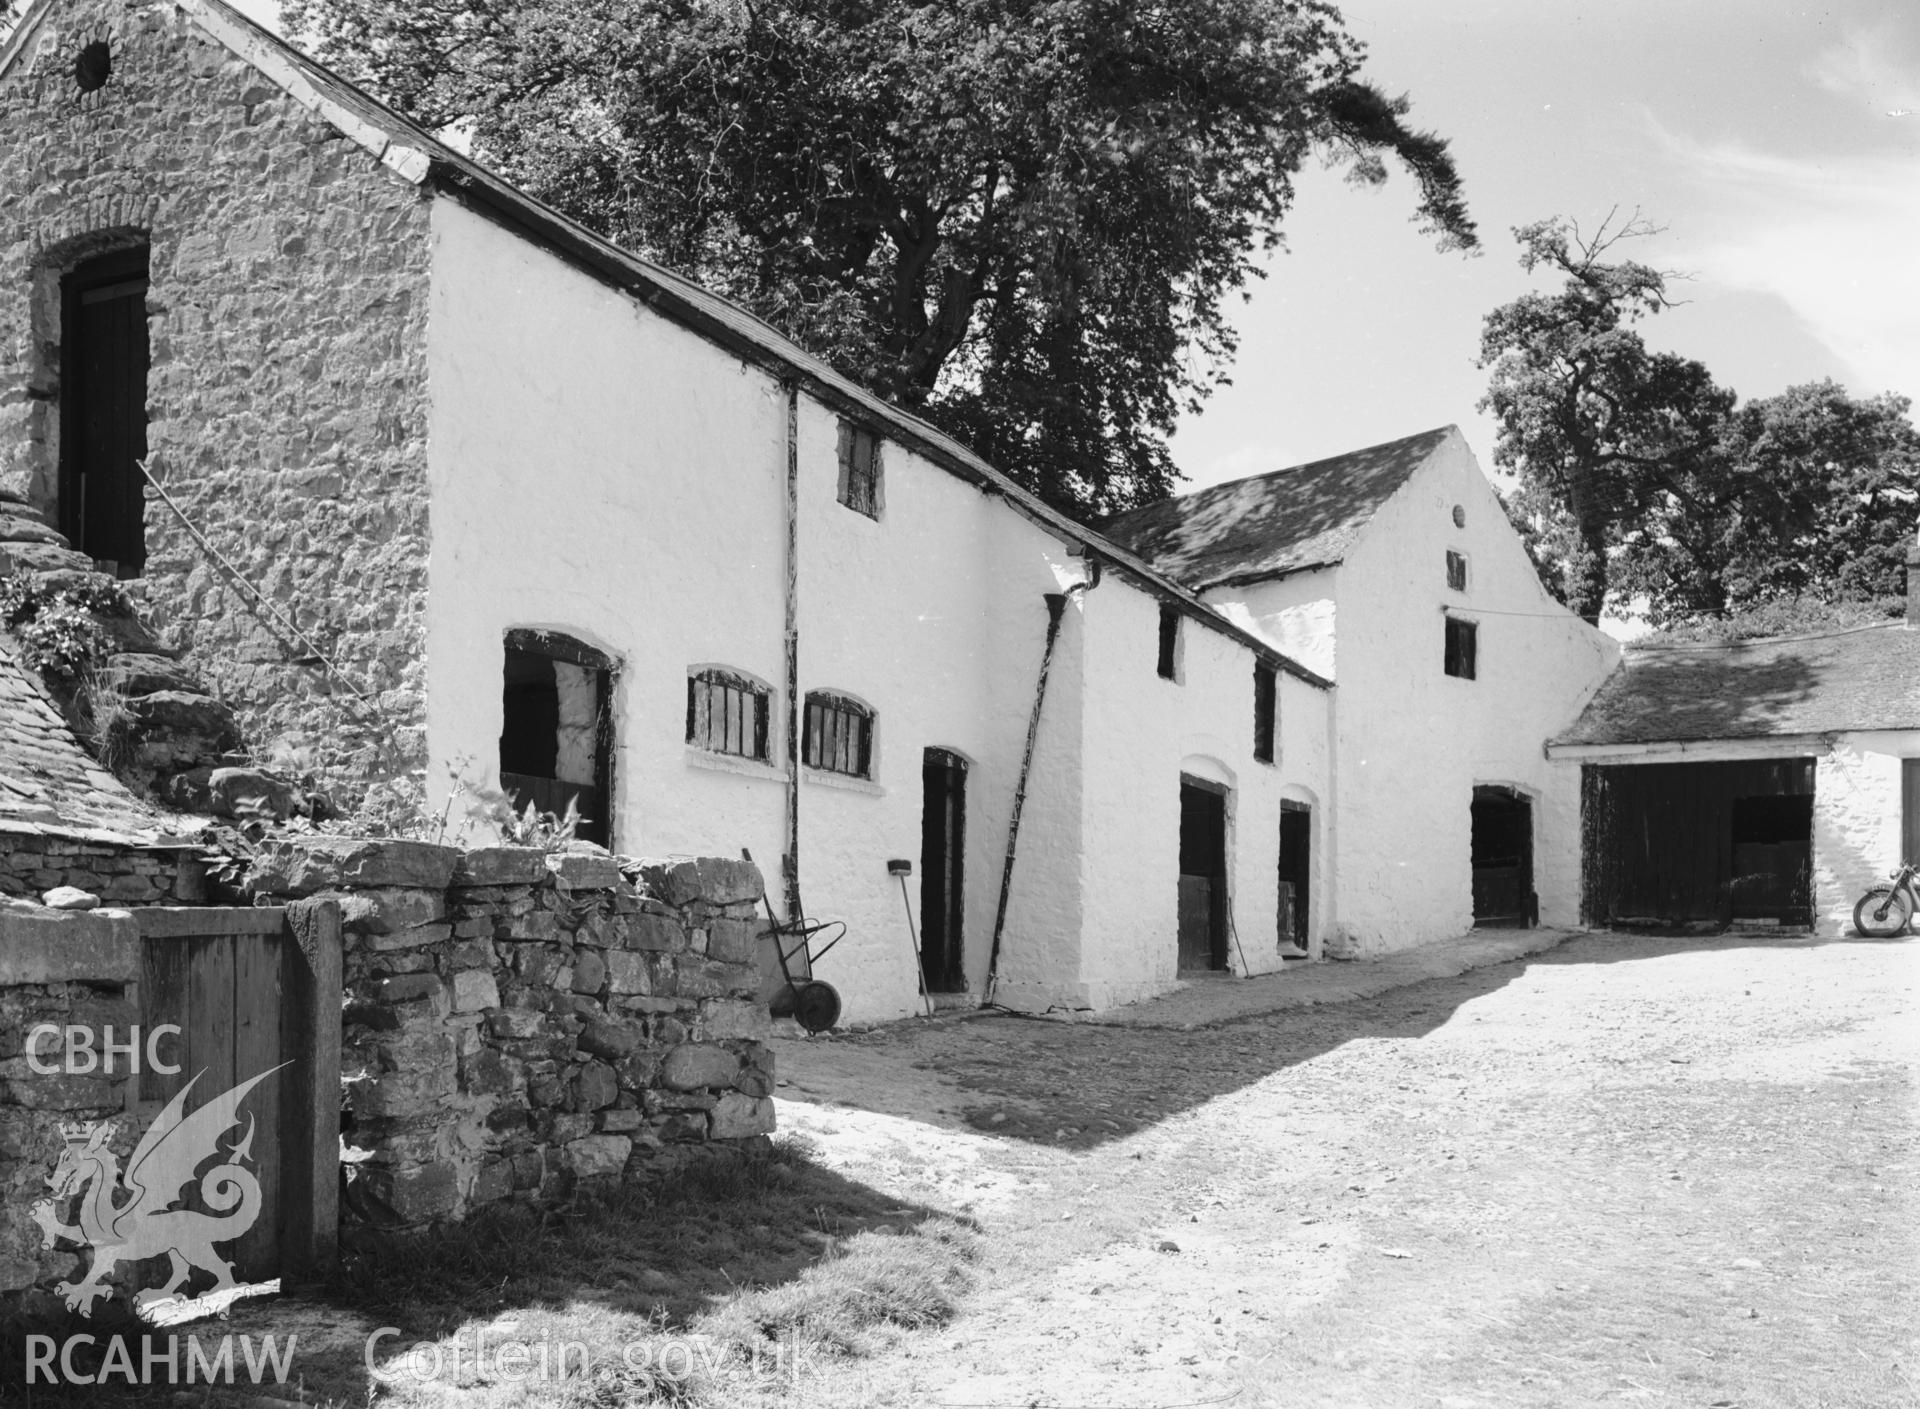 A black and white photograph of Dolwen Mill.